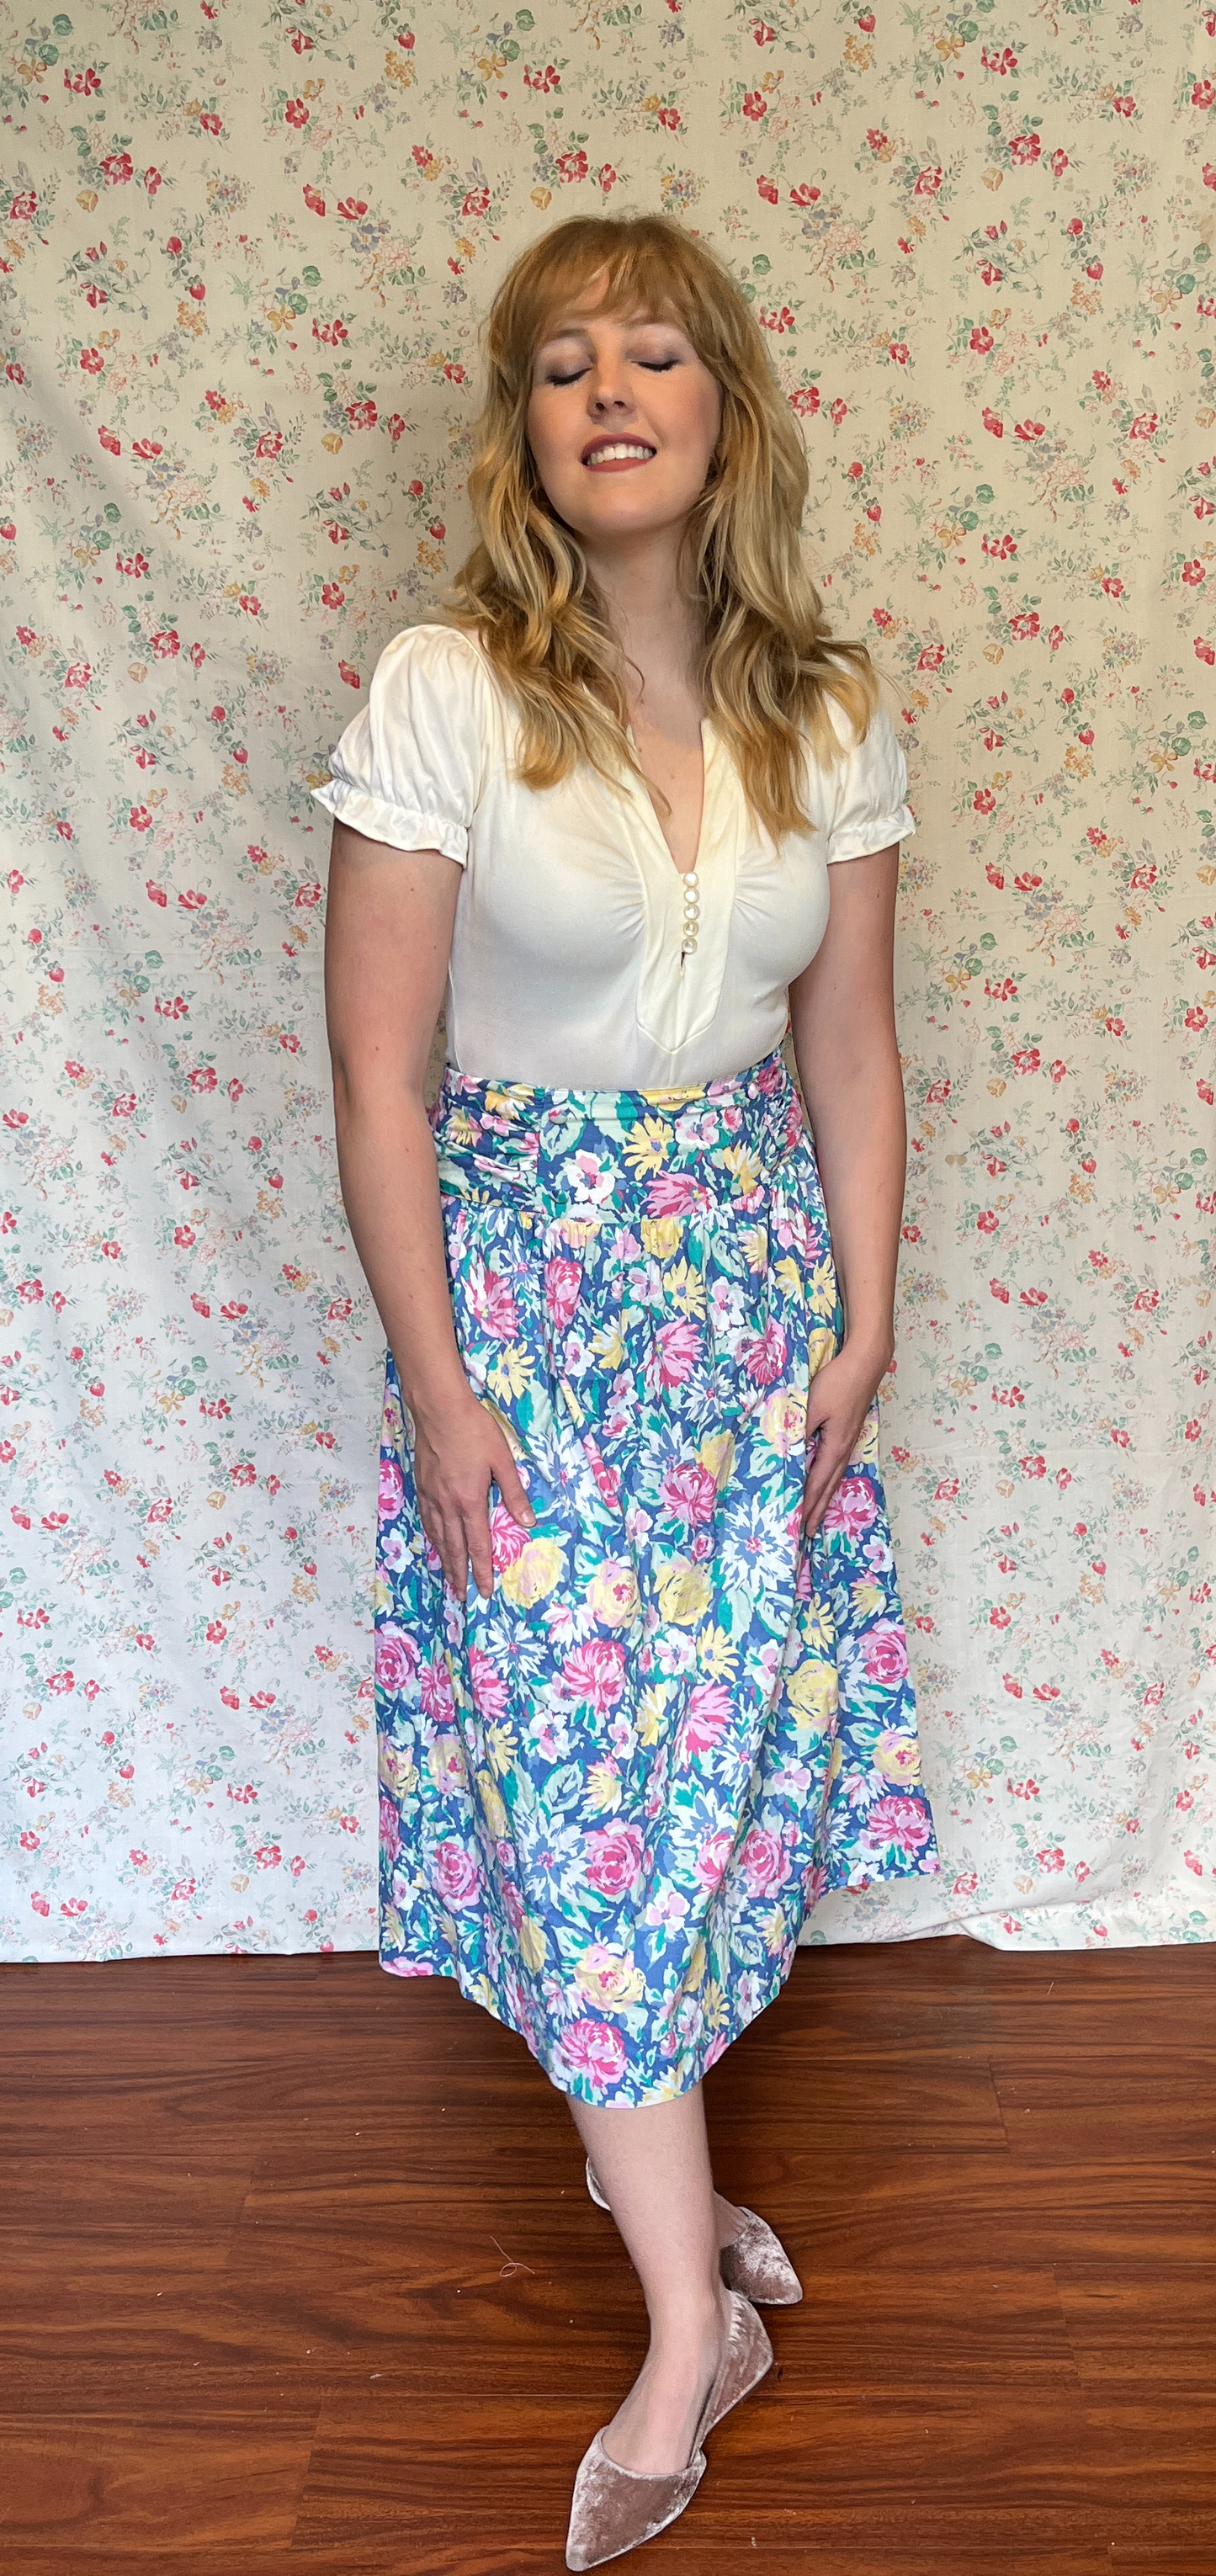 Vintage 1980’s "Laura Ashley" Blue, Pink & Yellow Floral Midi Skirt with Sash